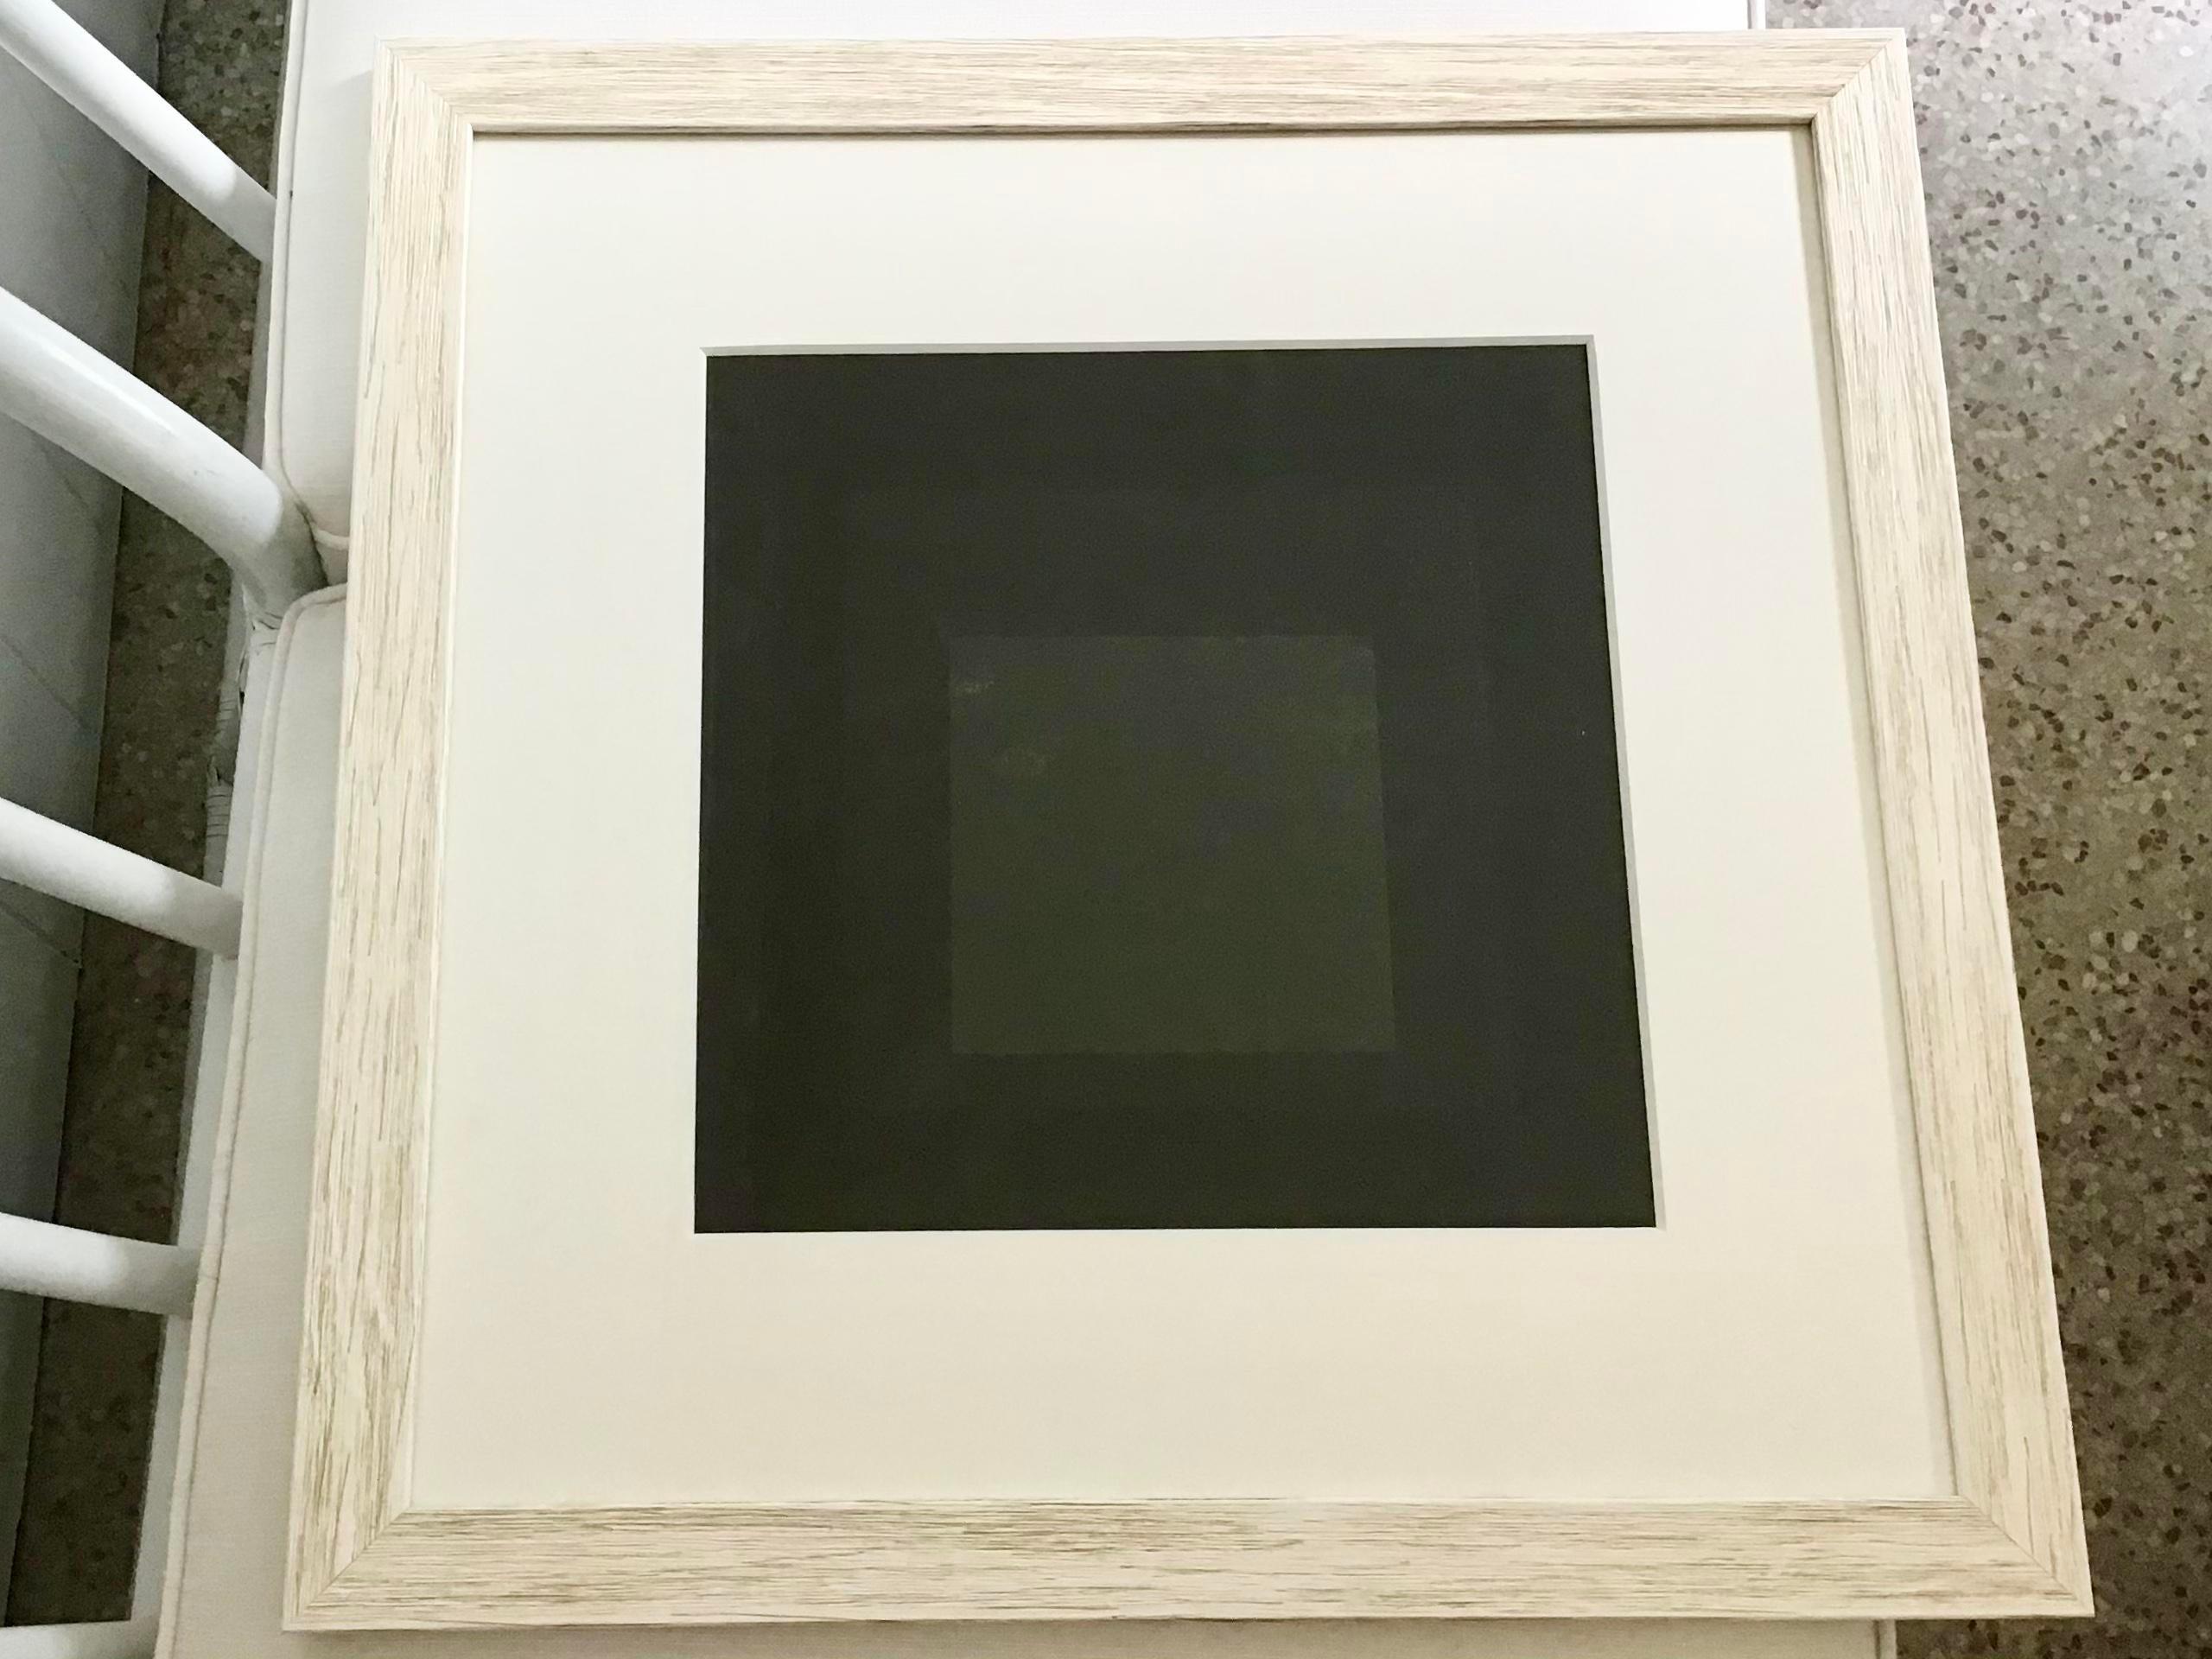 Very rare Josef Albers dark colors lithograph art piece. Add some modern art to your interiors. Beautiful new white washed frame.

Art piece dimensions: 16